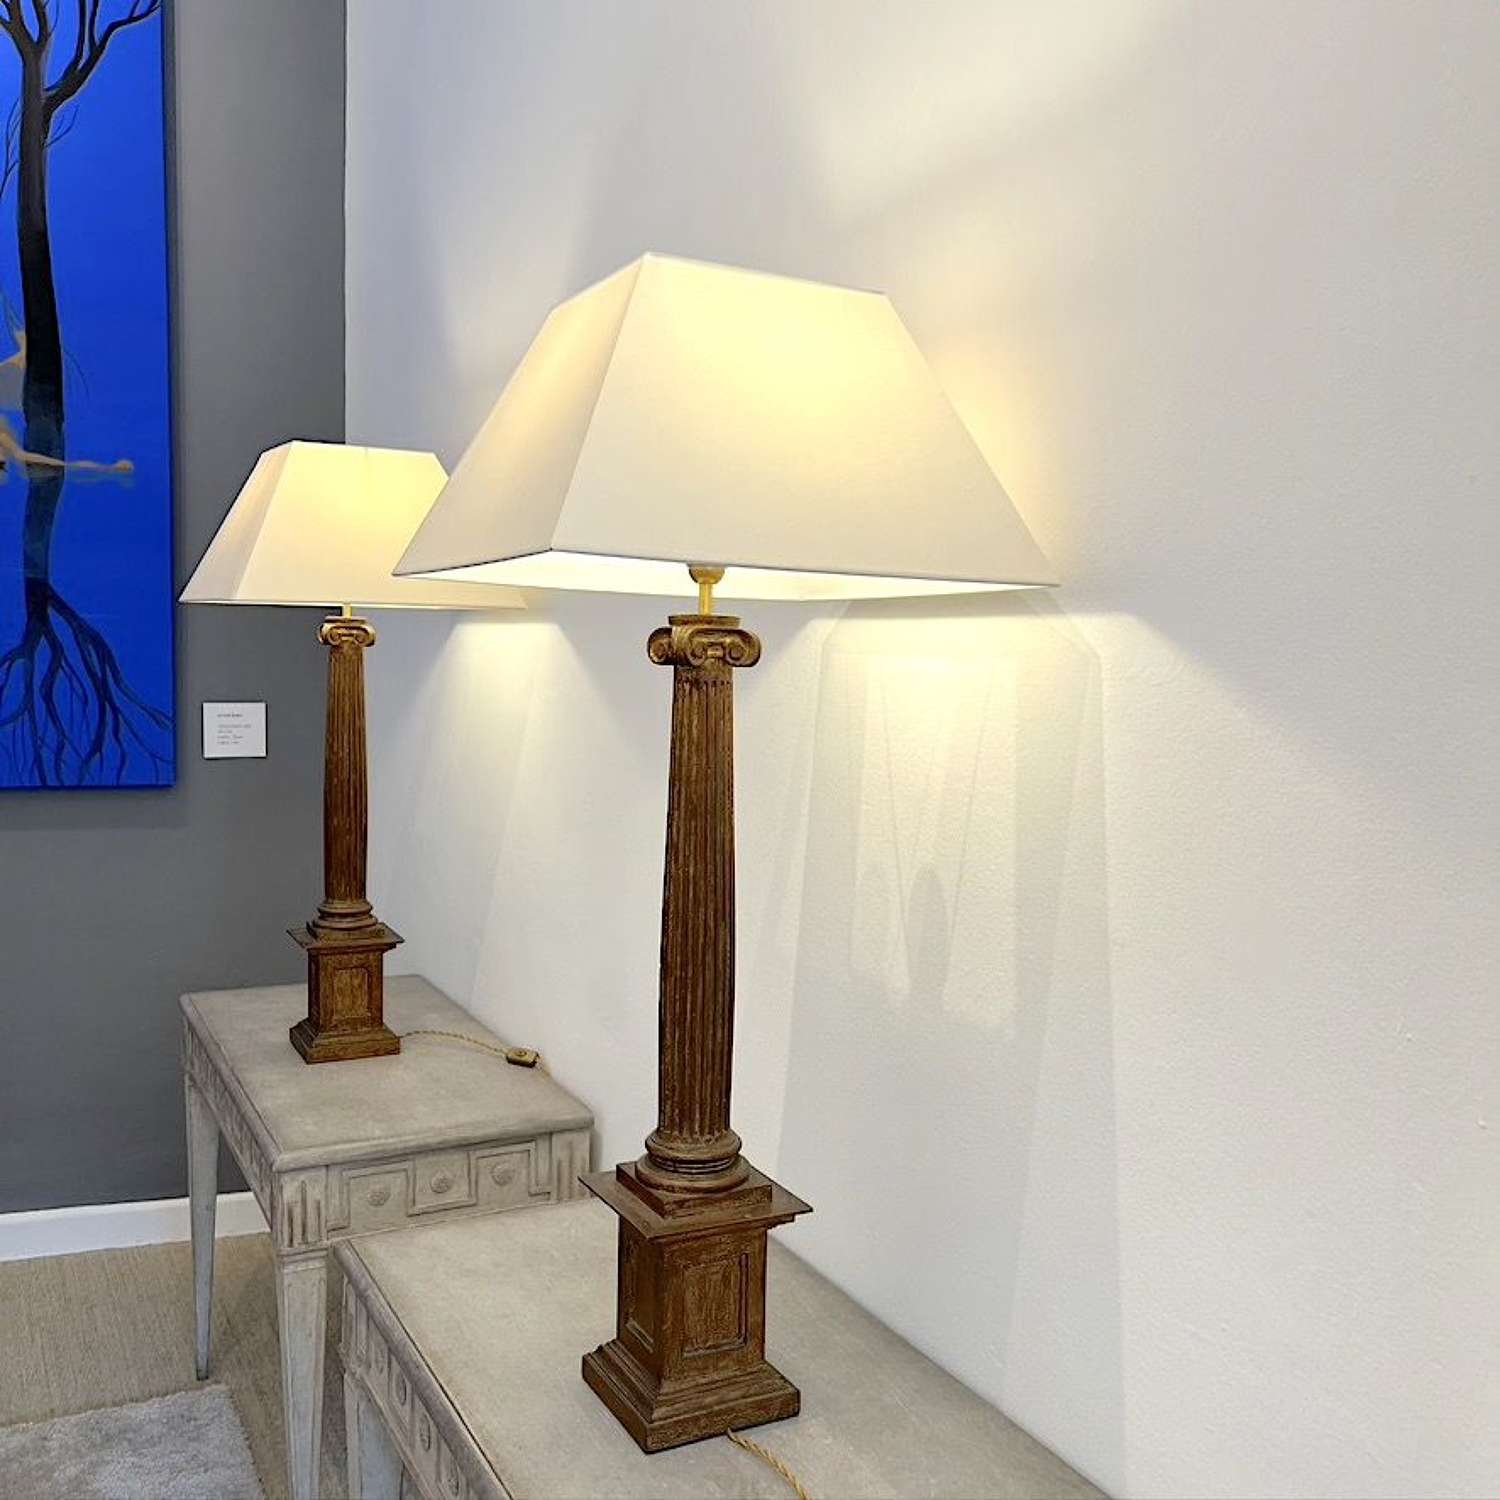 Pair of French Table Lamps